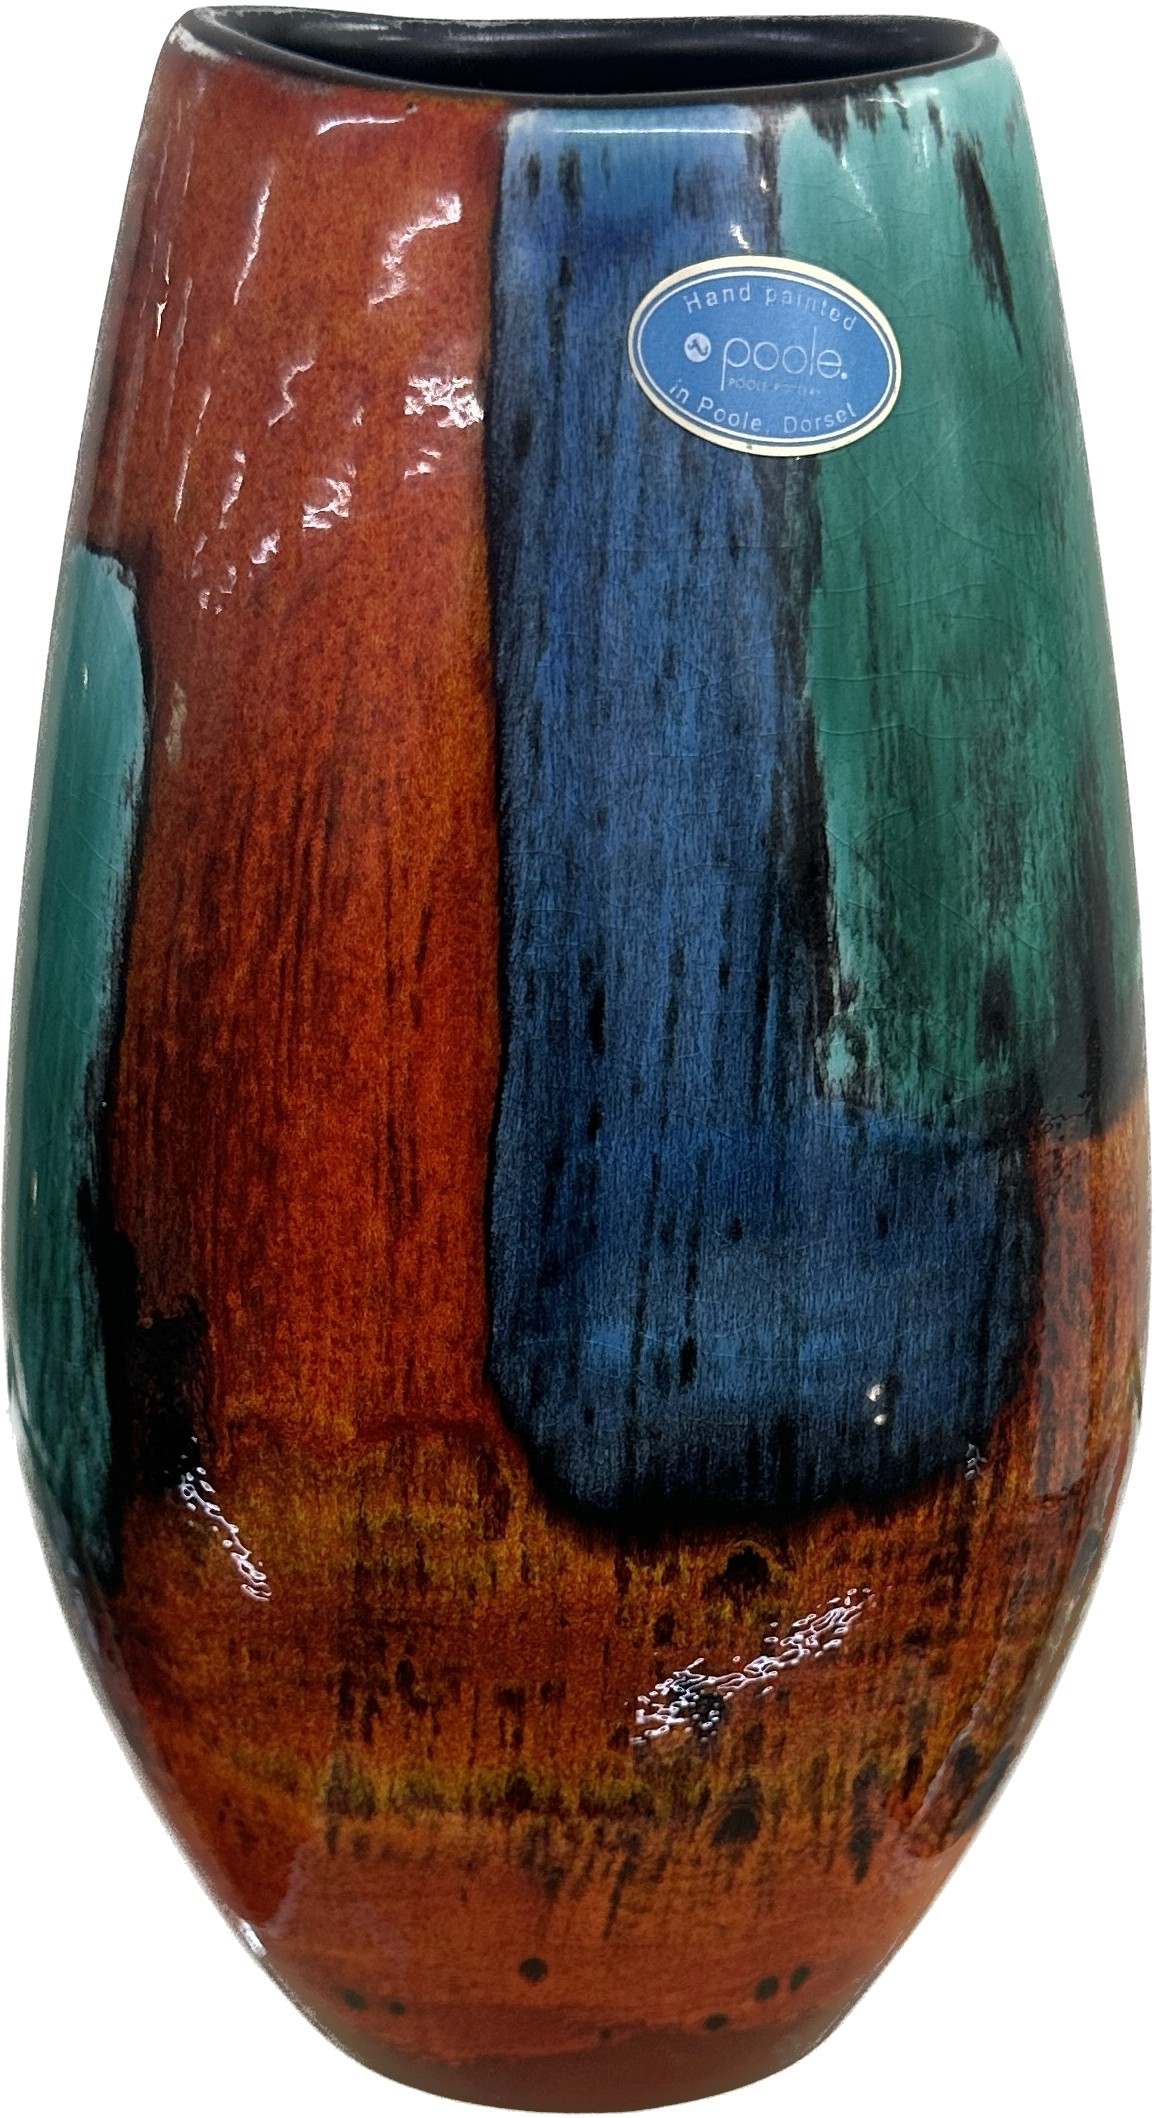 Poole Pottery Graffiti small vase, overall height 26cm, good overall condition - Image 2 of 4